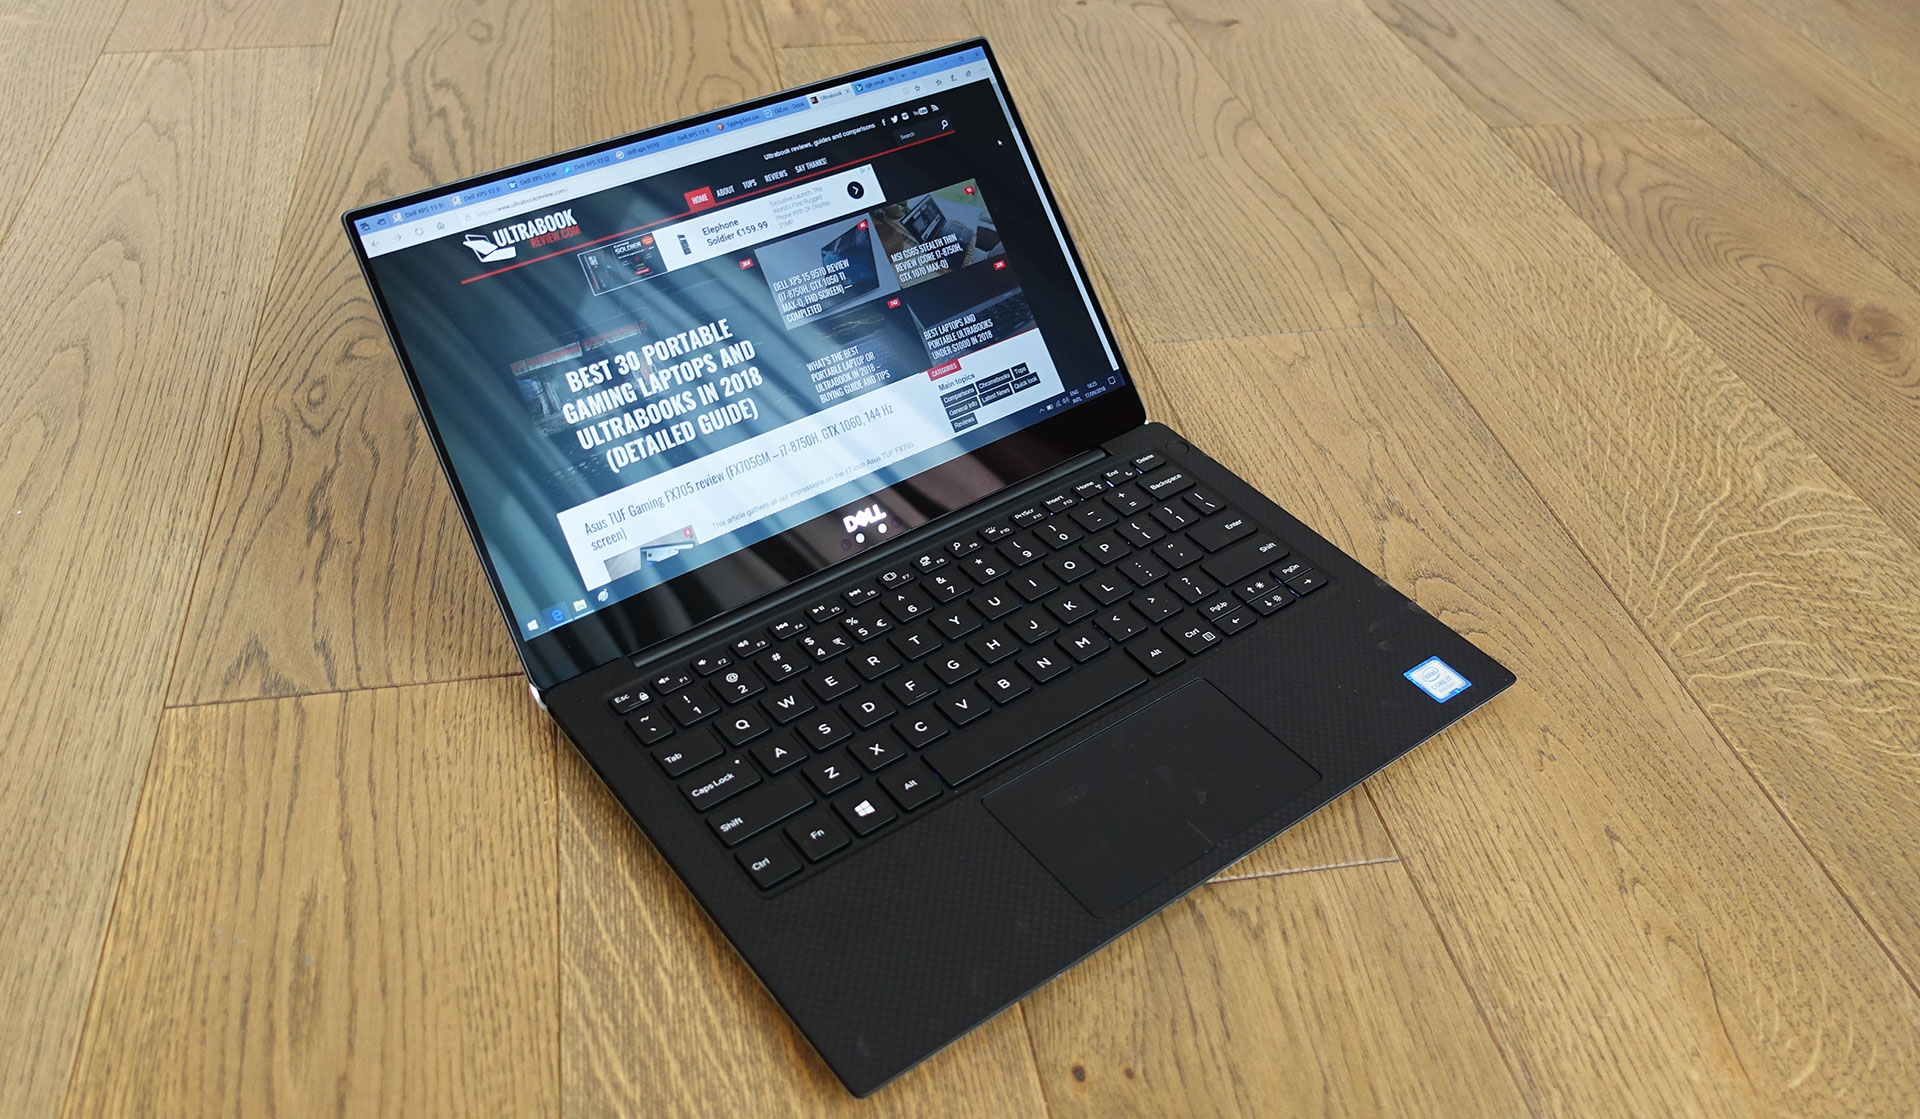 Dell XPS 13 9370 review (i7-8550U, FHD screen) - an upgrade, but 